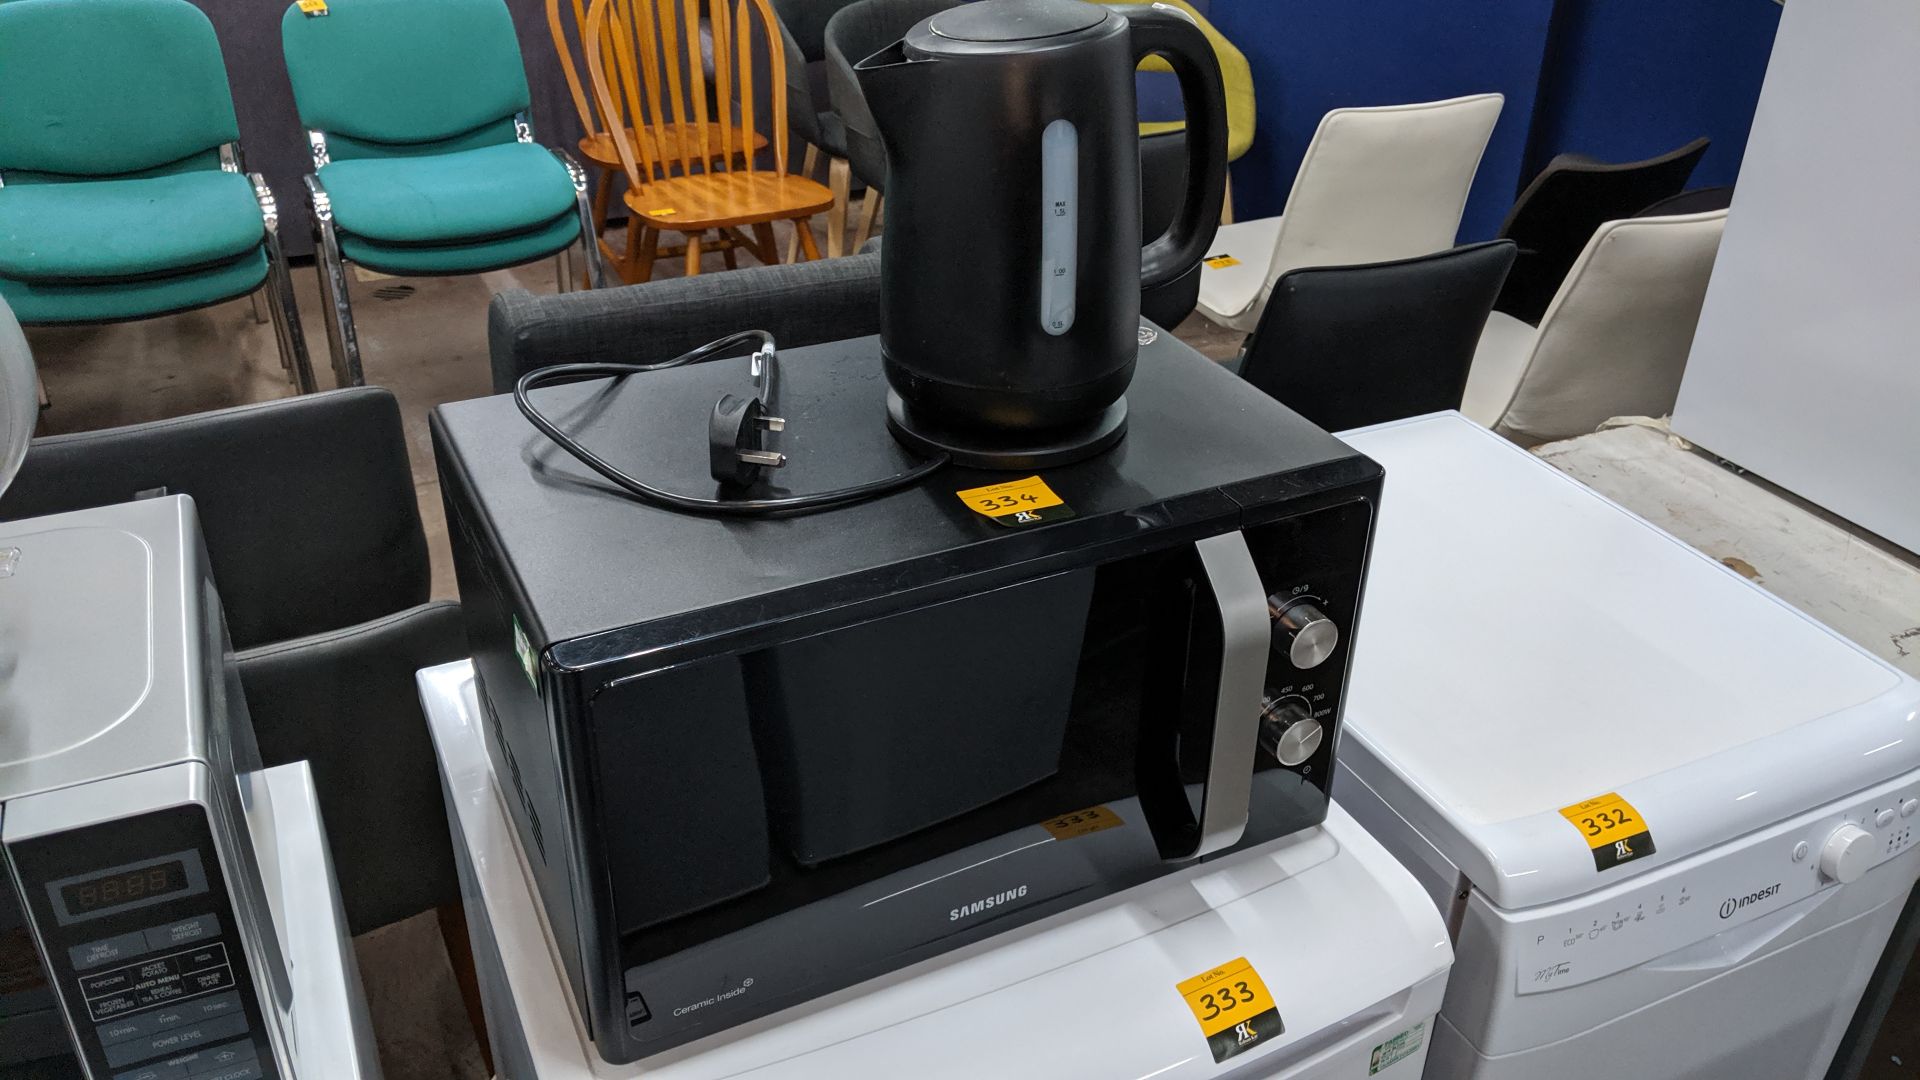 Samsung microwave with ceramic interior plus cordless kettle, both finished in black. This is one of - Image 2 of 5